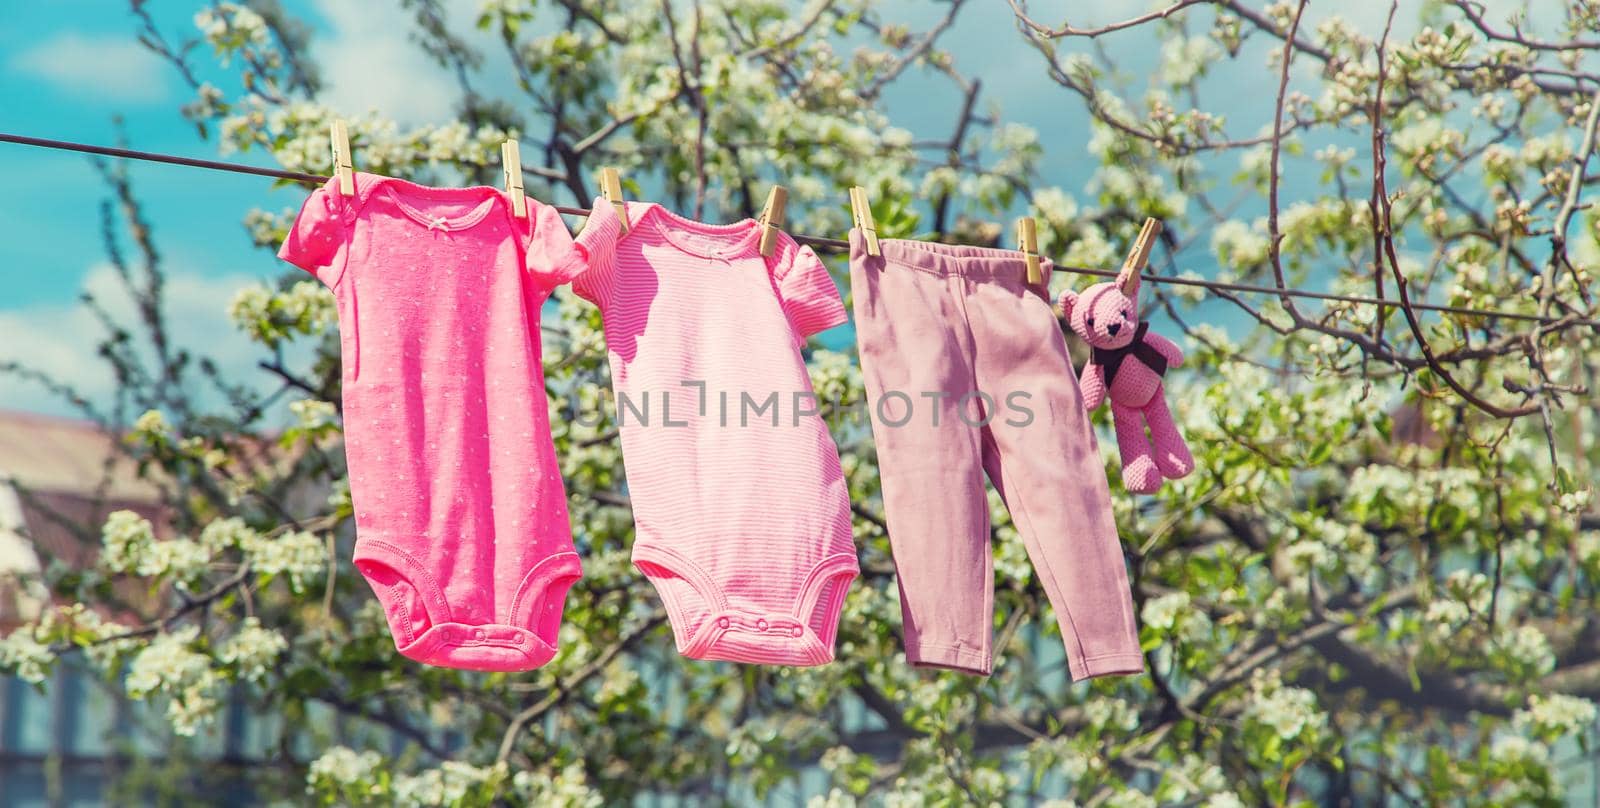 Baby clothes are drying on the street. Selective focus. by yanadjana